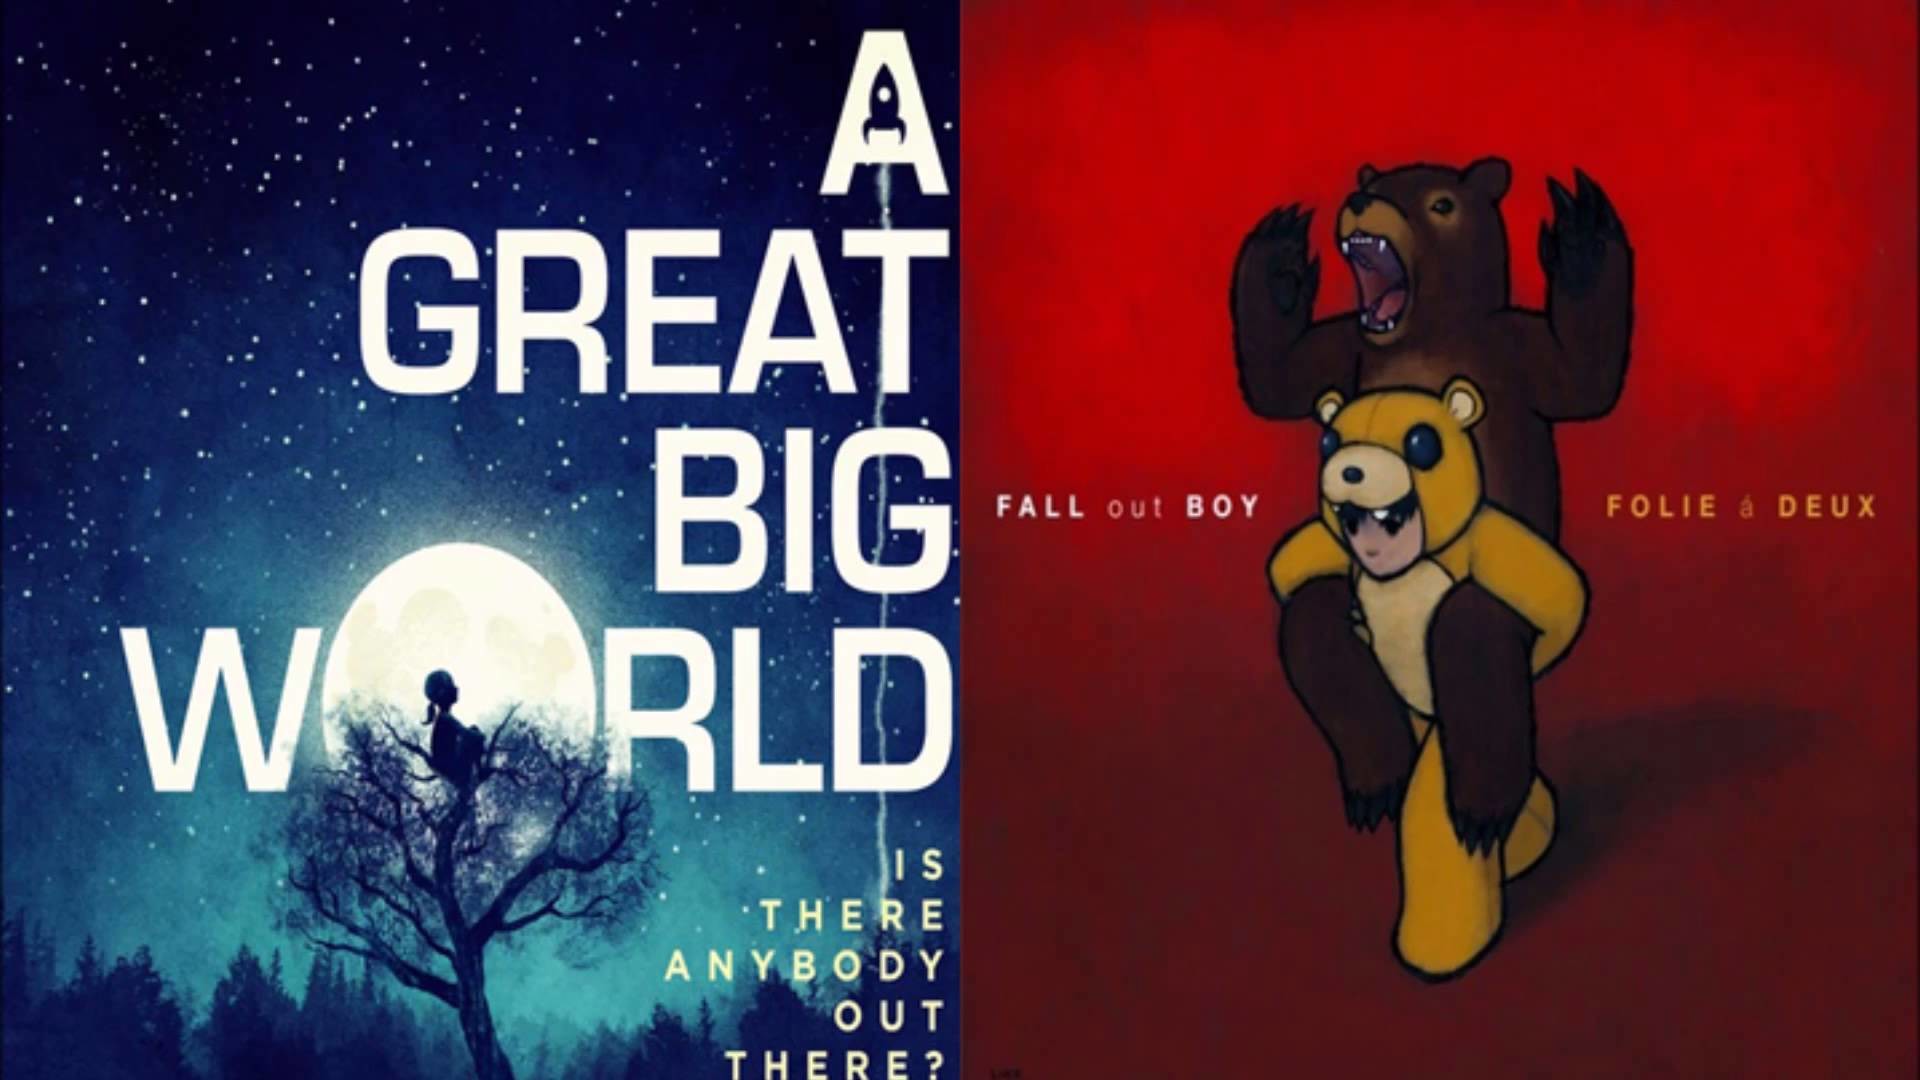 1920x1080 Say Something Suitehearts [Mashup] - A Great Big World & Fall Out Boy -